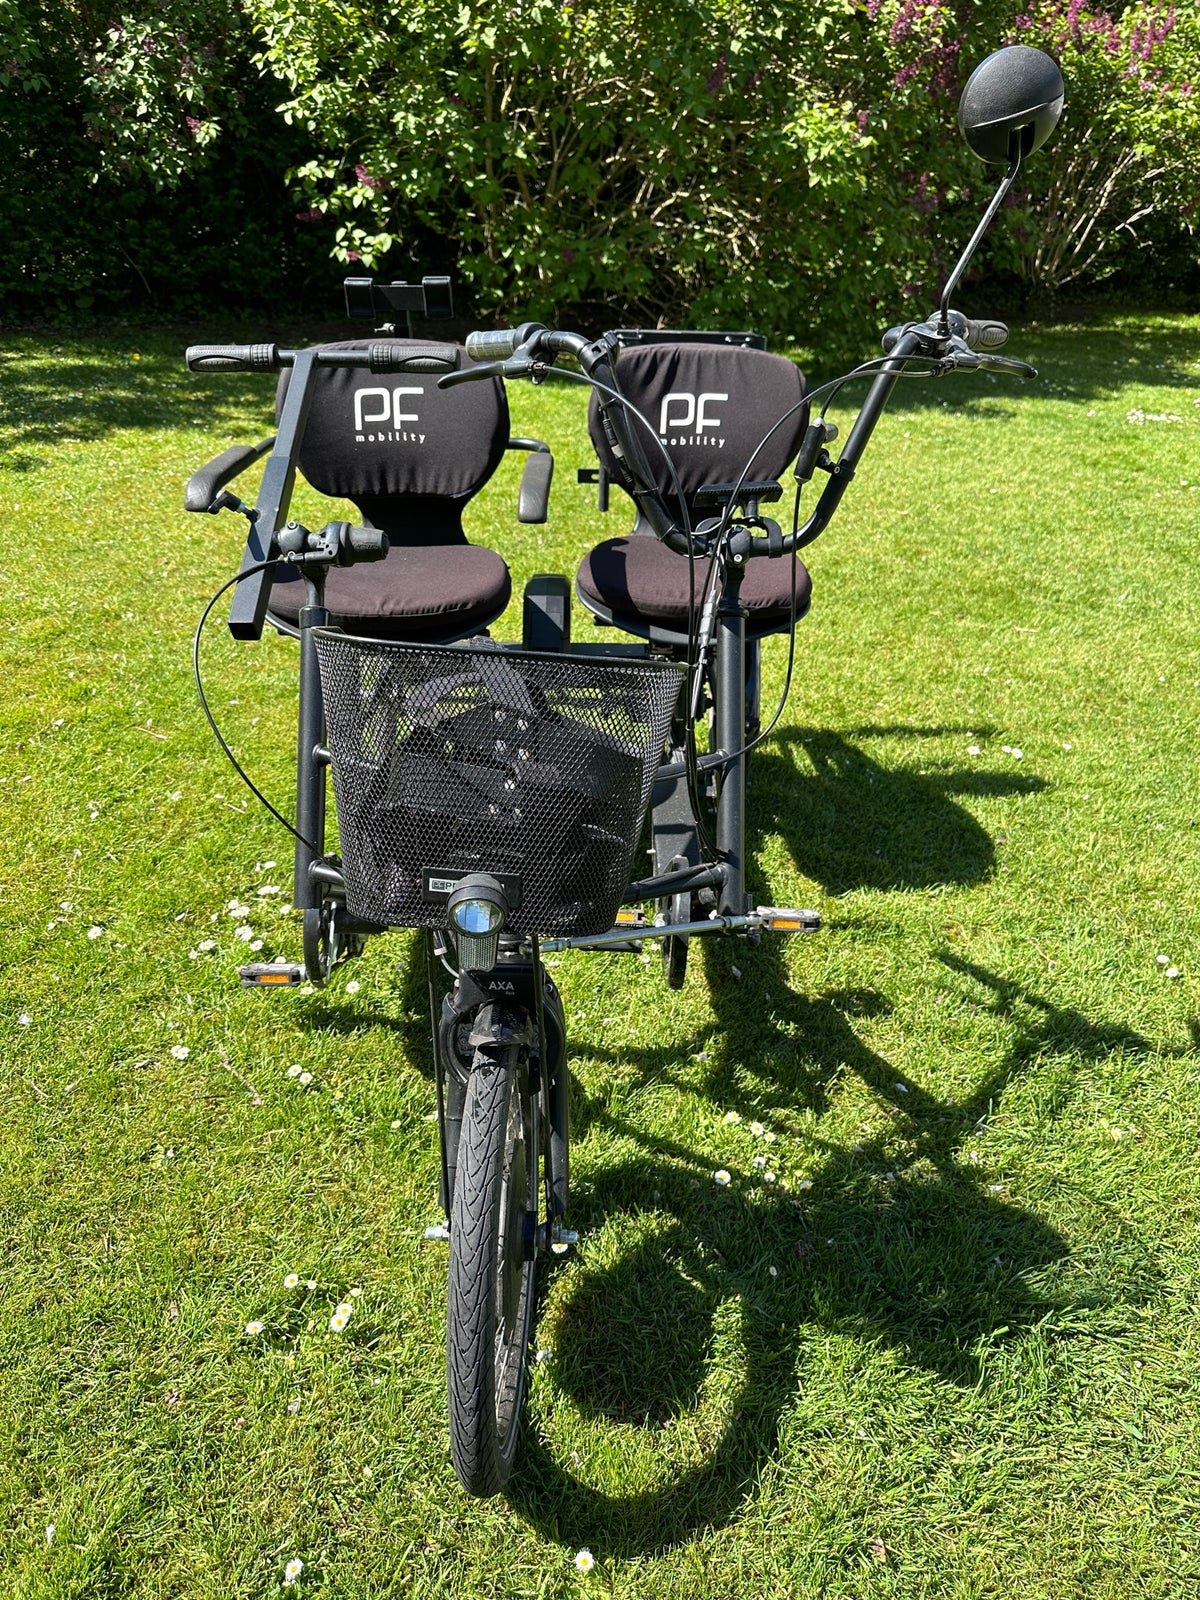 Handicapcykel, 2 personers side-by-side cykel fra PF